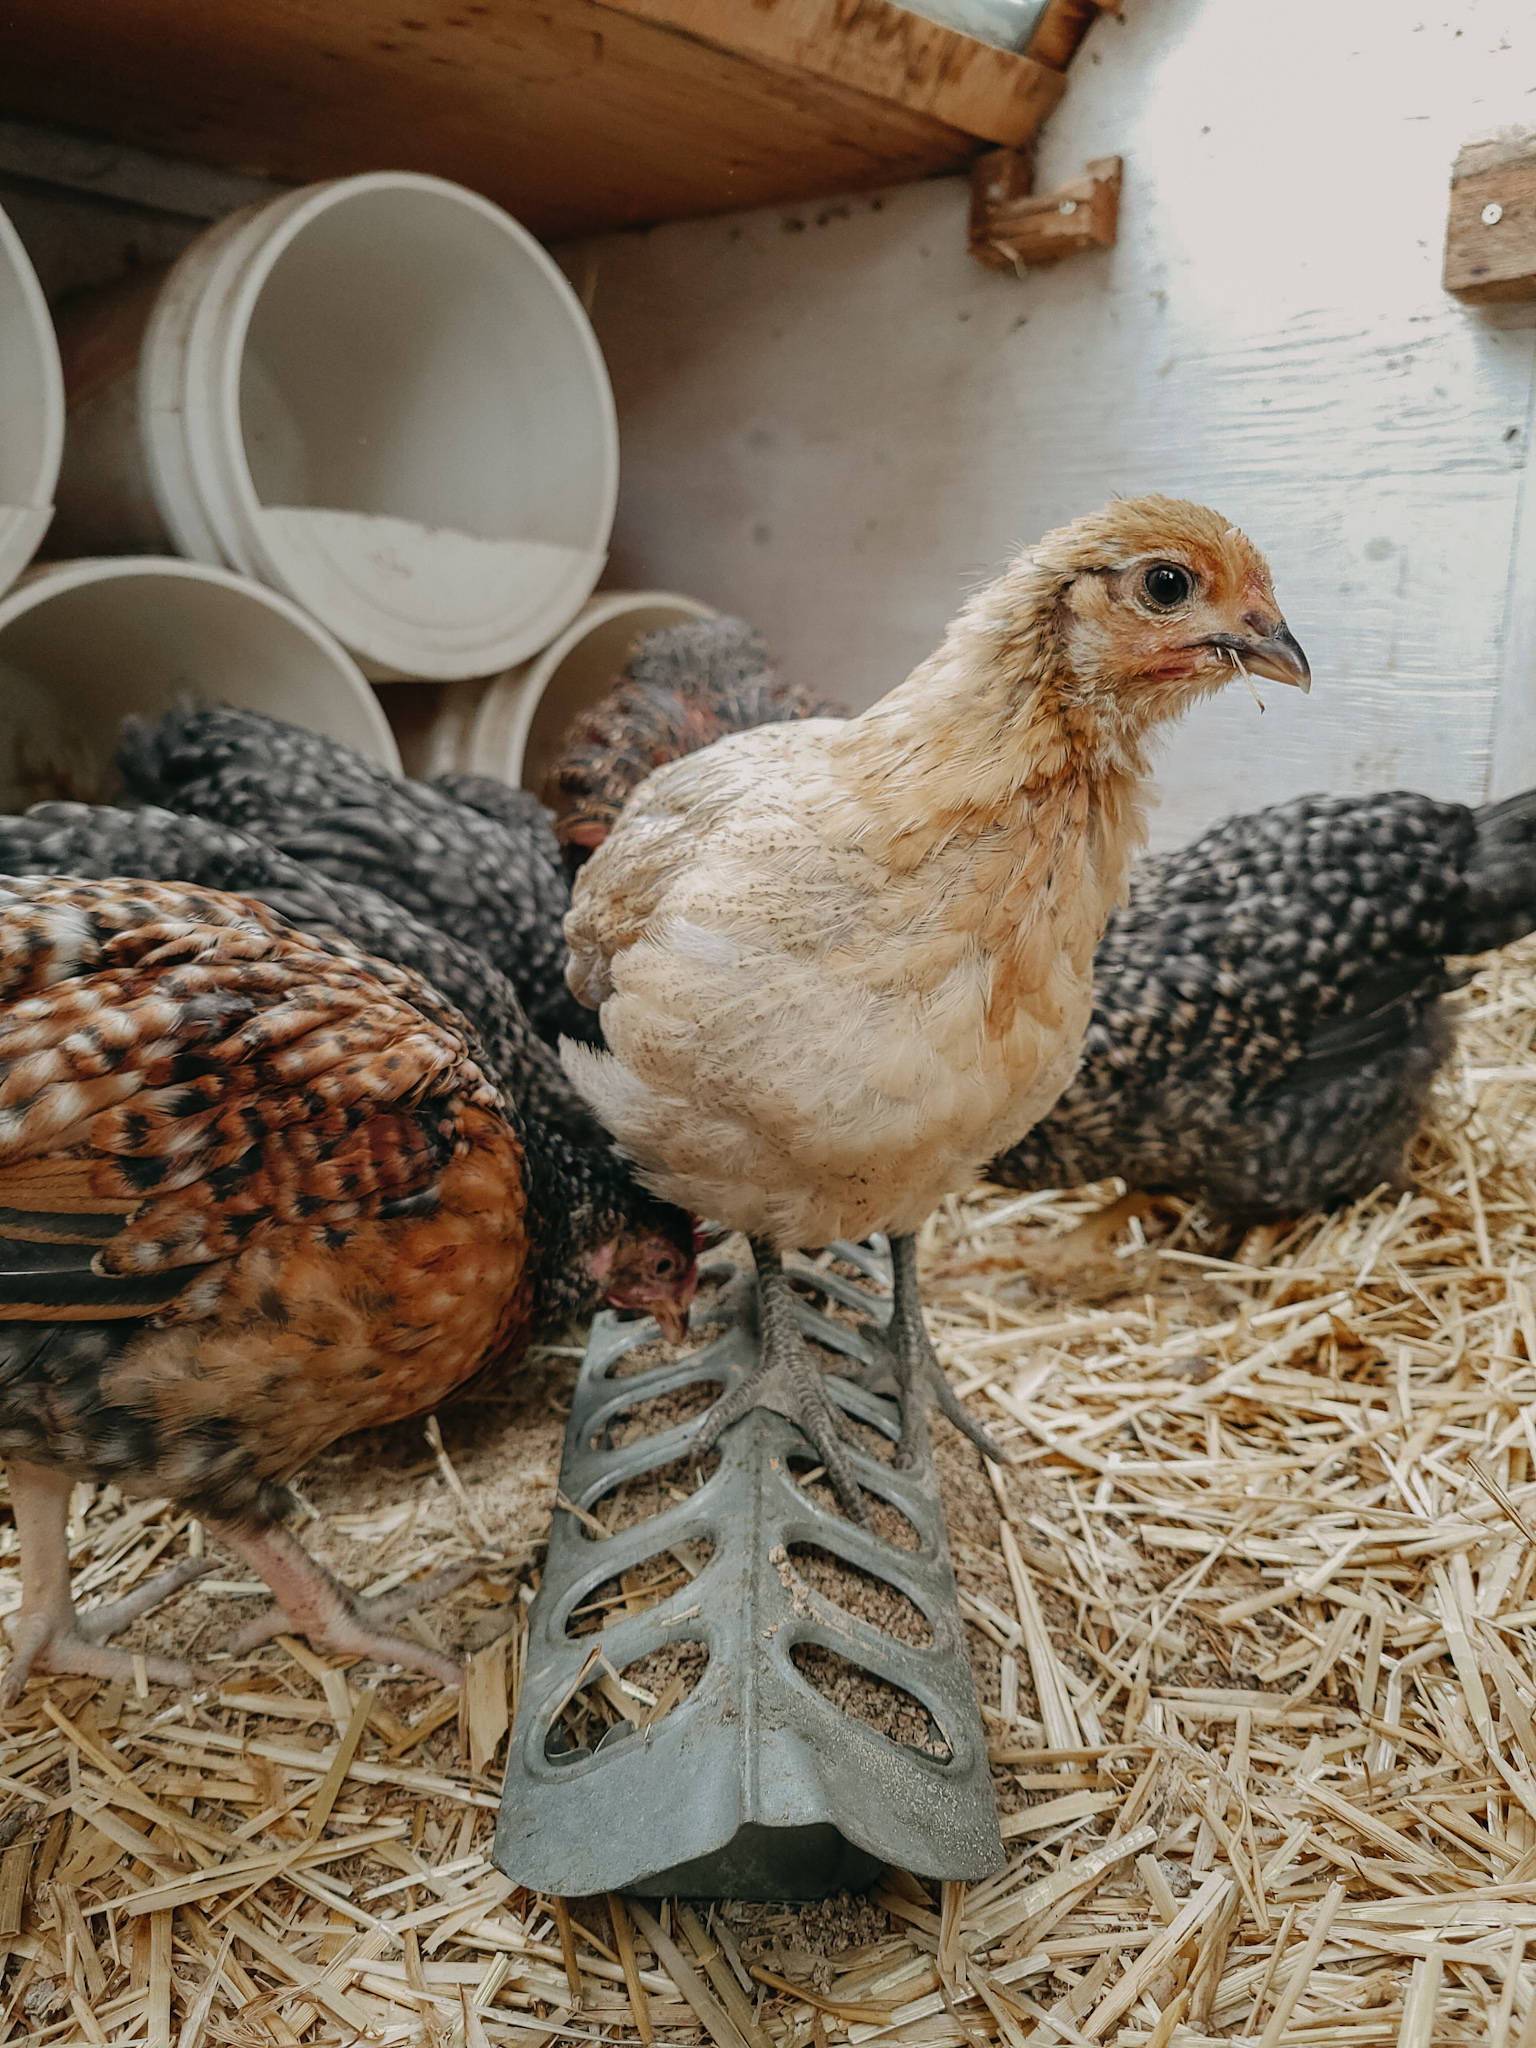 Young chickens integrated with the older chicken flock.